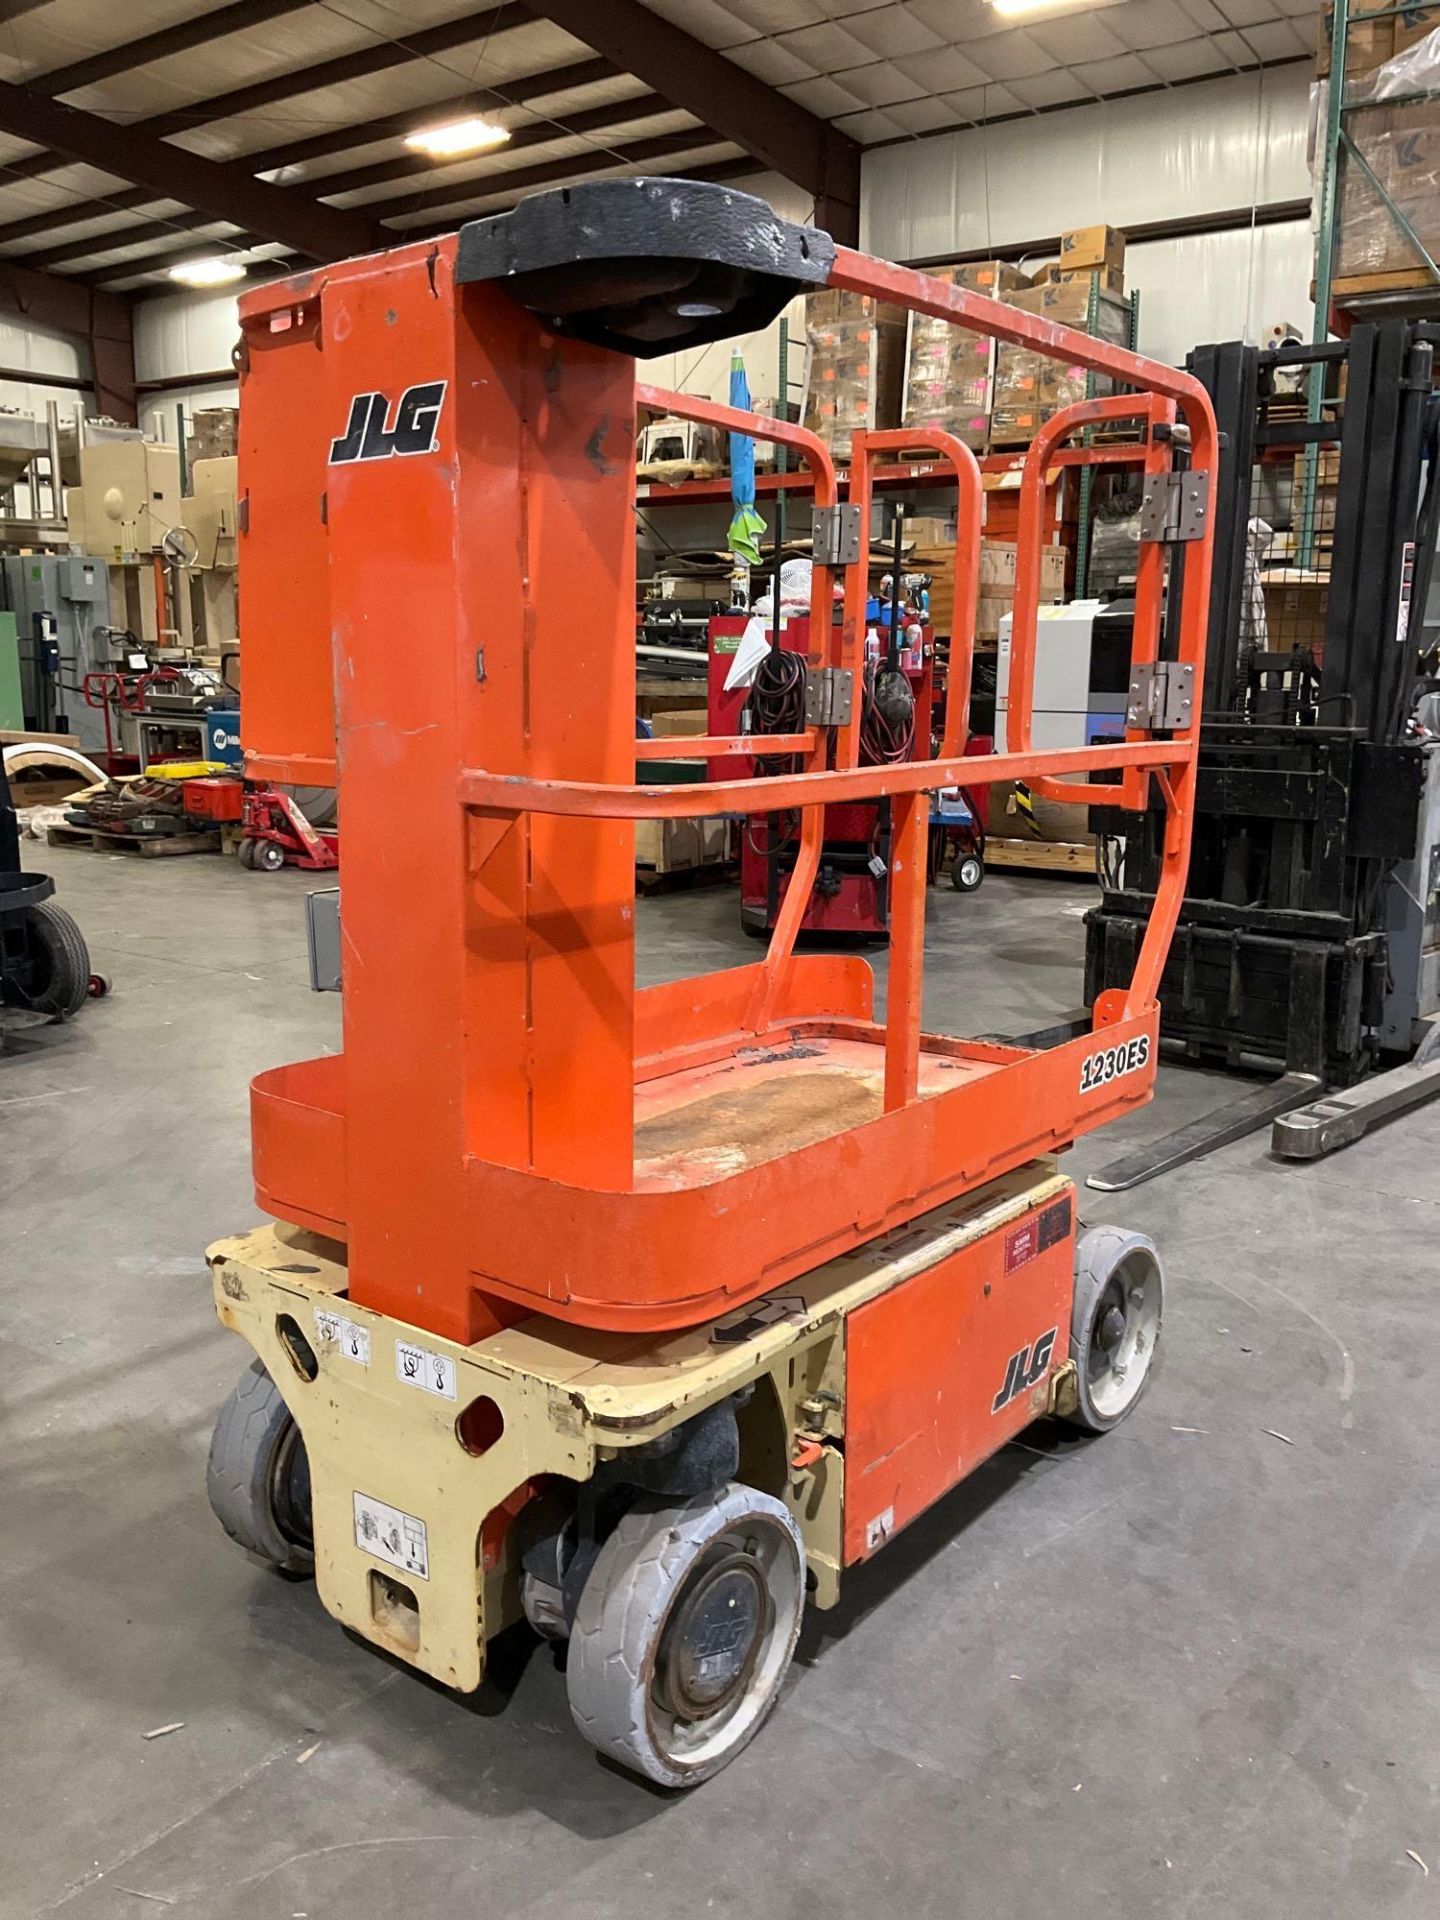 JLG MANLIFT MODEL 1230ES, ELECTRIC, APPROX MAX PLATFORM HEIGHT 12FT, NON MARKING TIRES, BUILT IN BAT - Image 3 of 12